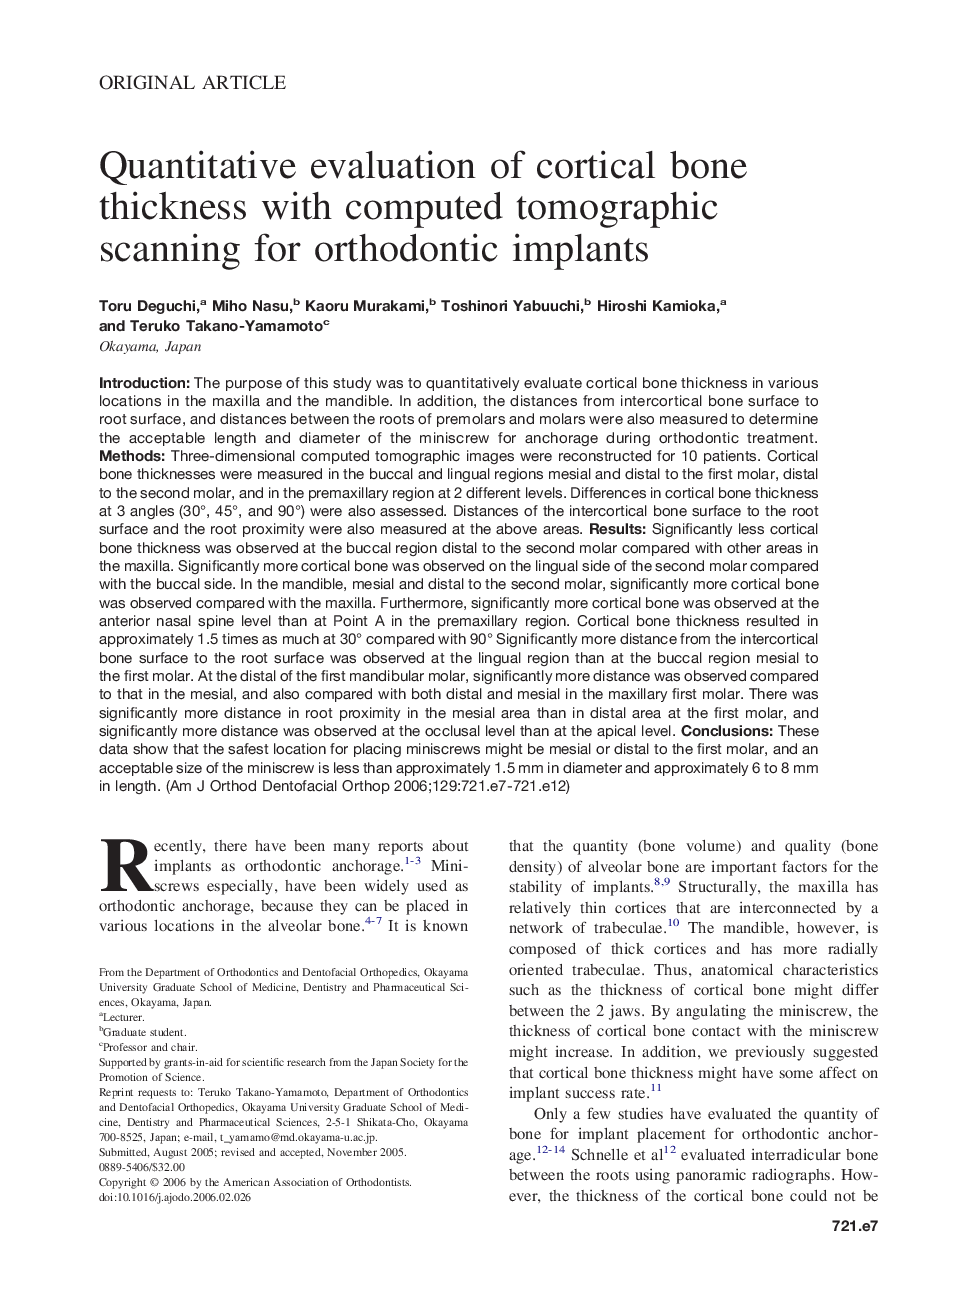 Quantitative evaluation of cortical bone thickness with computed tomographic scanning for orthodontic implants